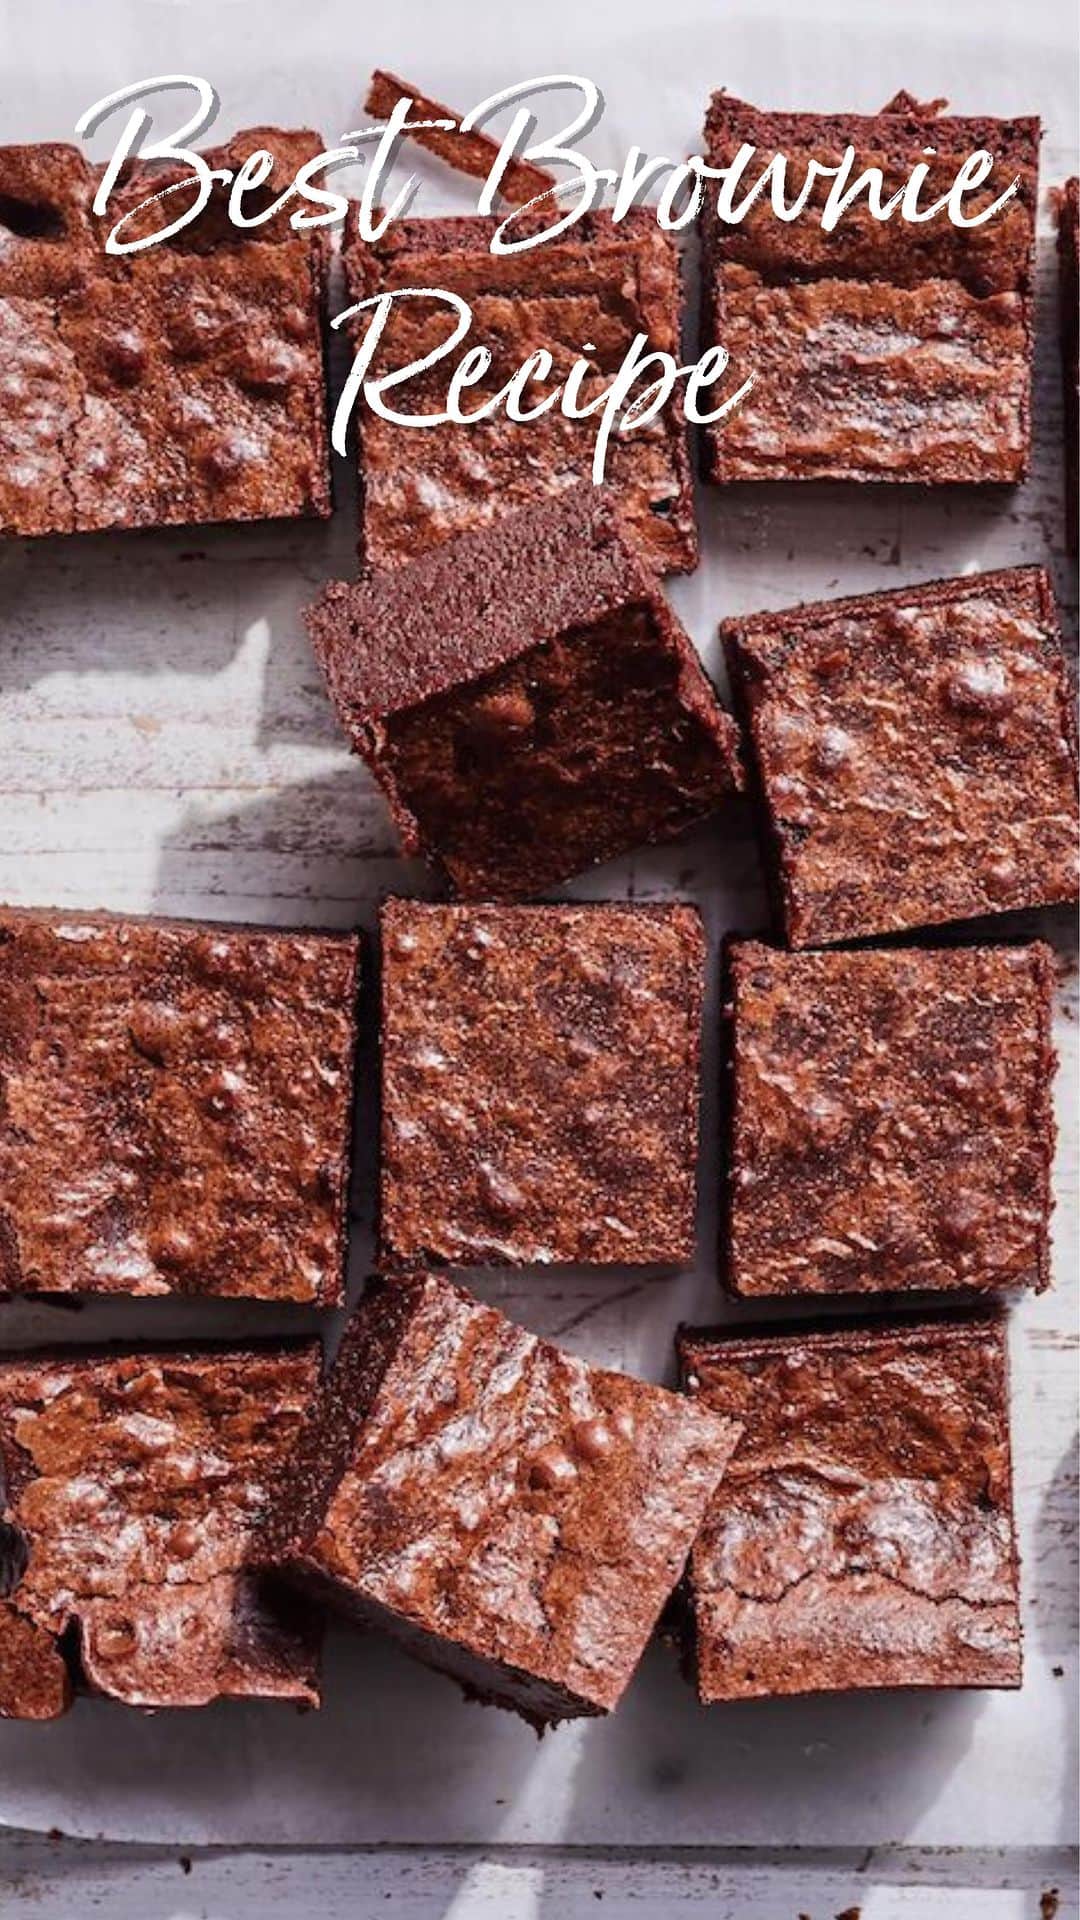 Gaby Dalkinのインスタグラム：「We’ve decided that summer 2023 is the summer of the brownie!! So before we kick off various spins on everyone’s fav chocolate dessert, we need a base recipe! This one will knock your socks off - PROMISE! Recipe linked in my bio https://whatsgabycooking.com/best-ever-brownie-recipe/」